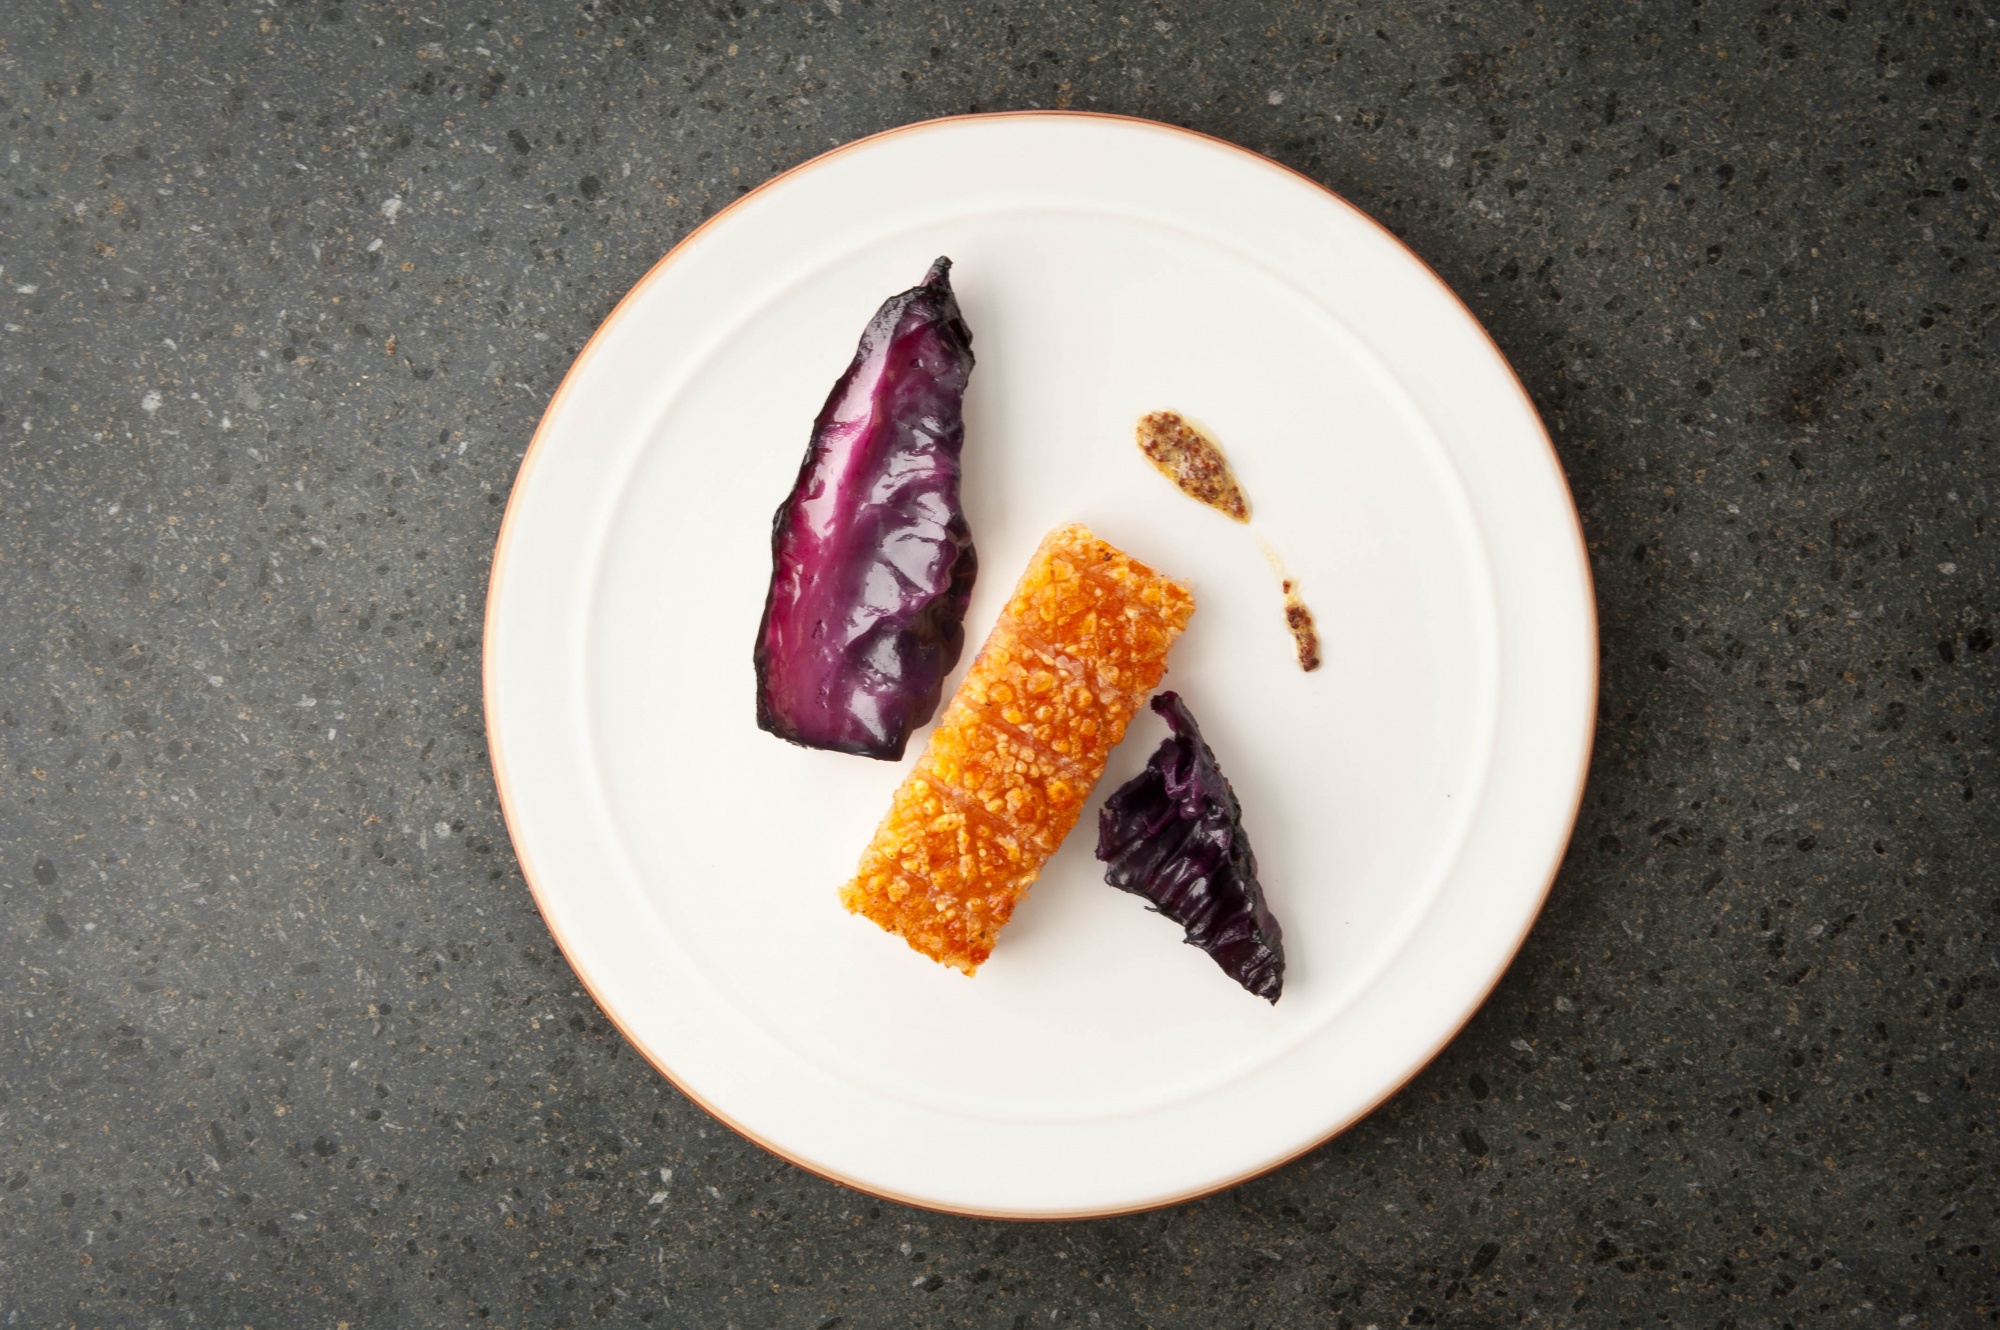 Pork belly, red cabbage and mustard